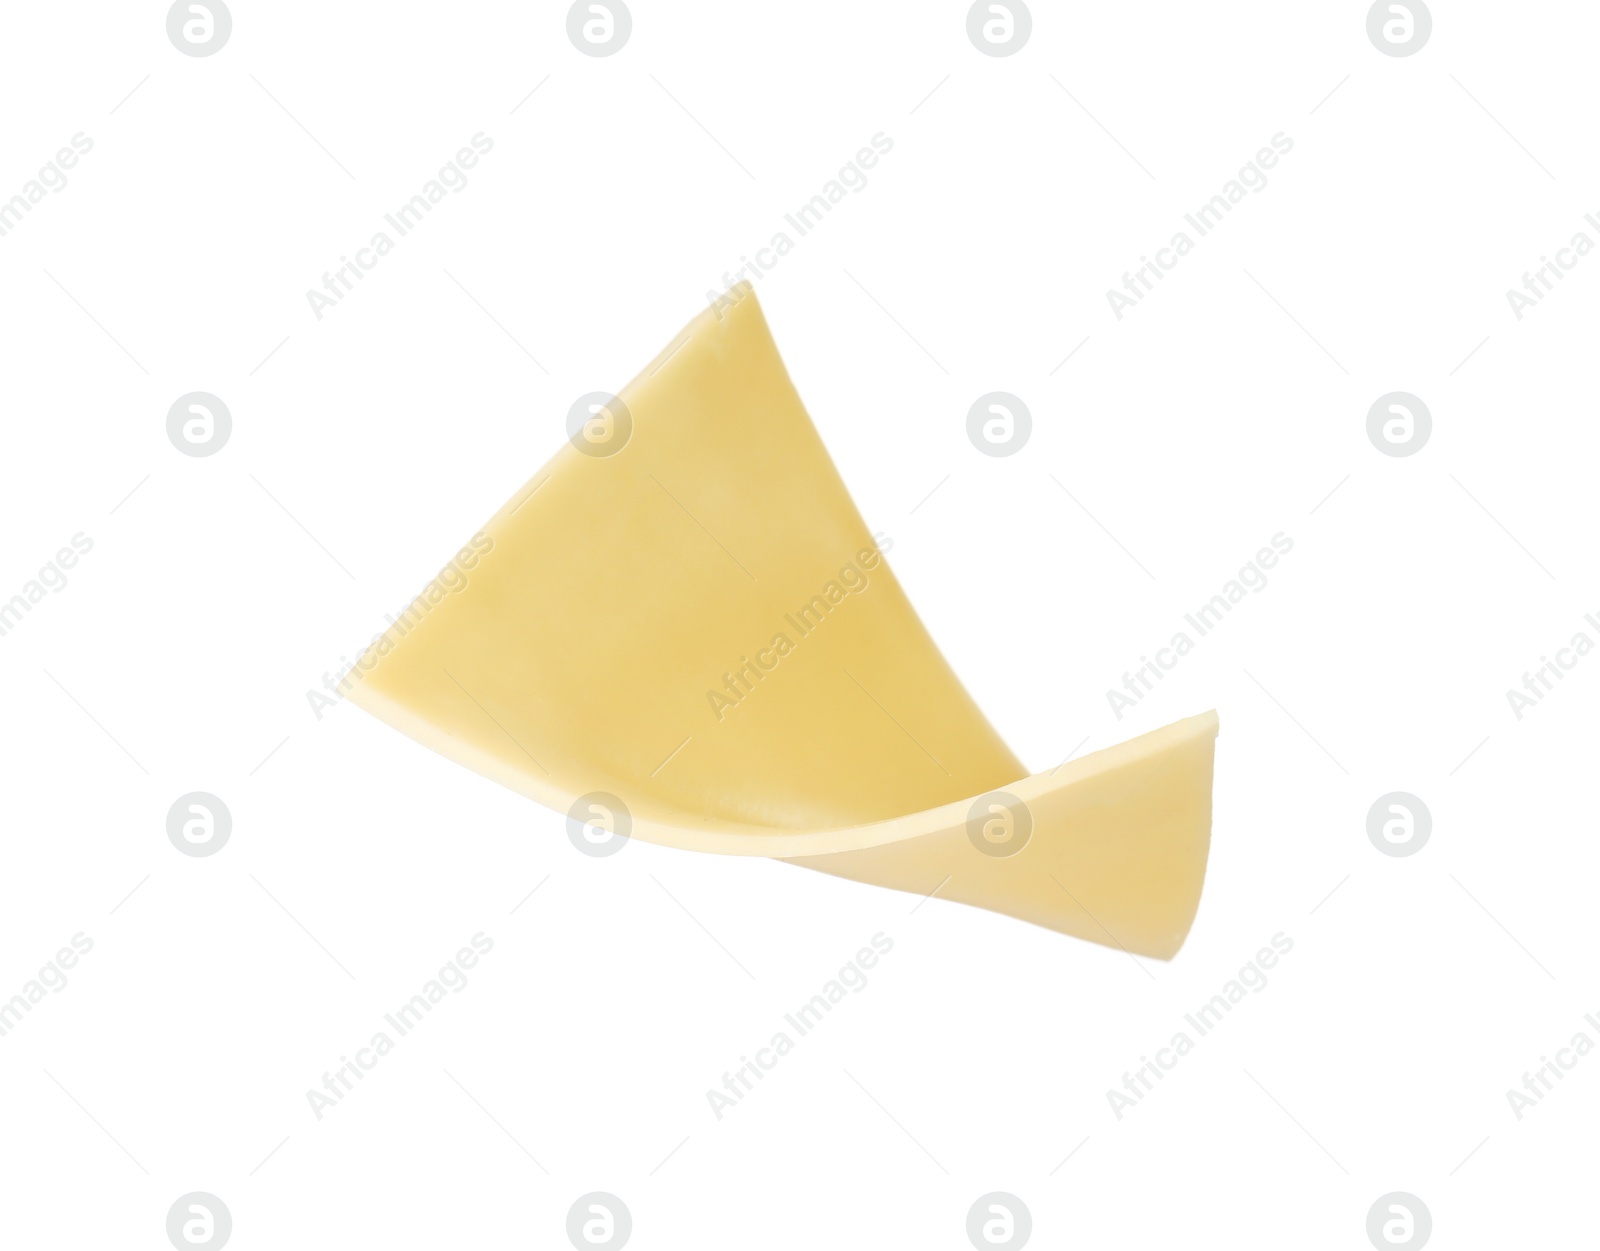 Photo of Slice of cheese for burger isolated on white